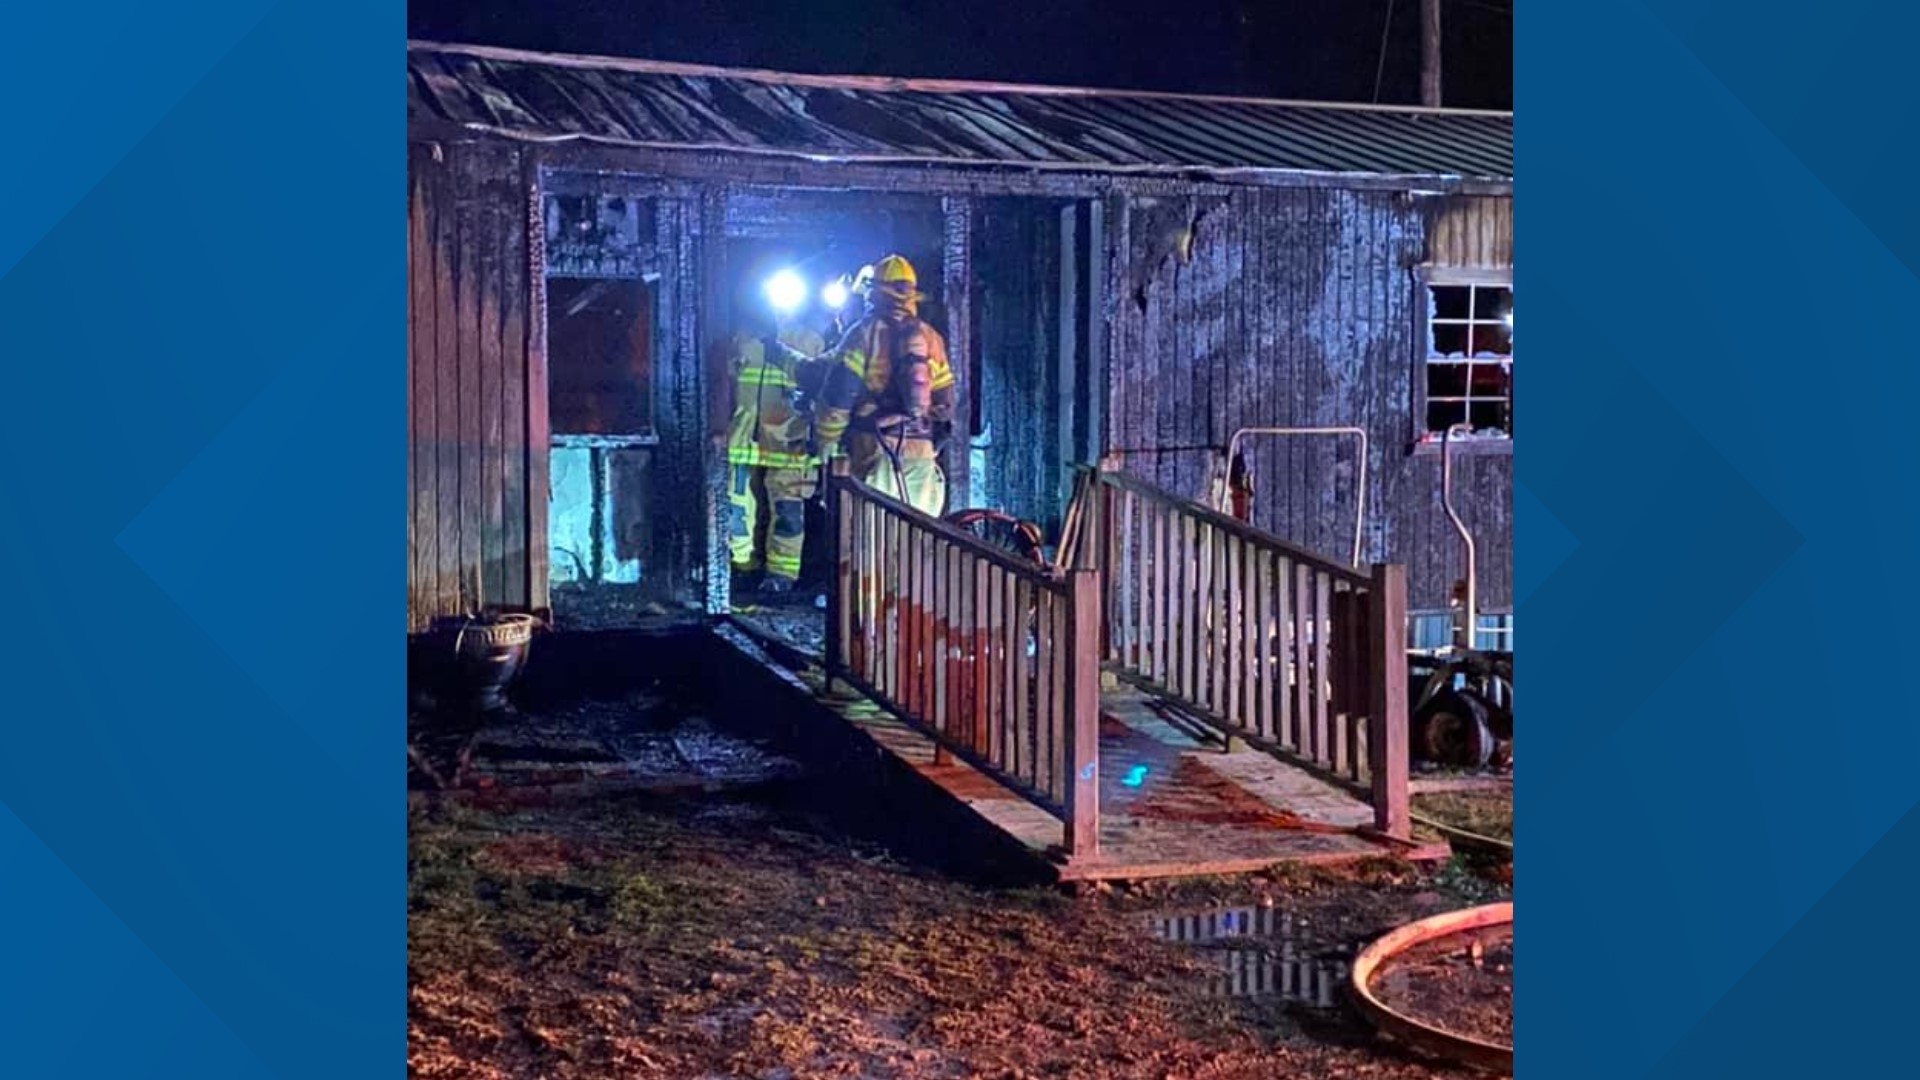 11 dogs were killed in an animal shelter fire.